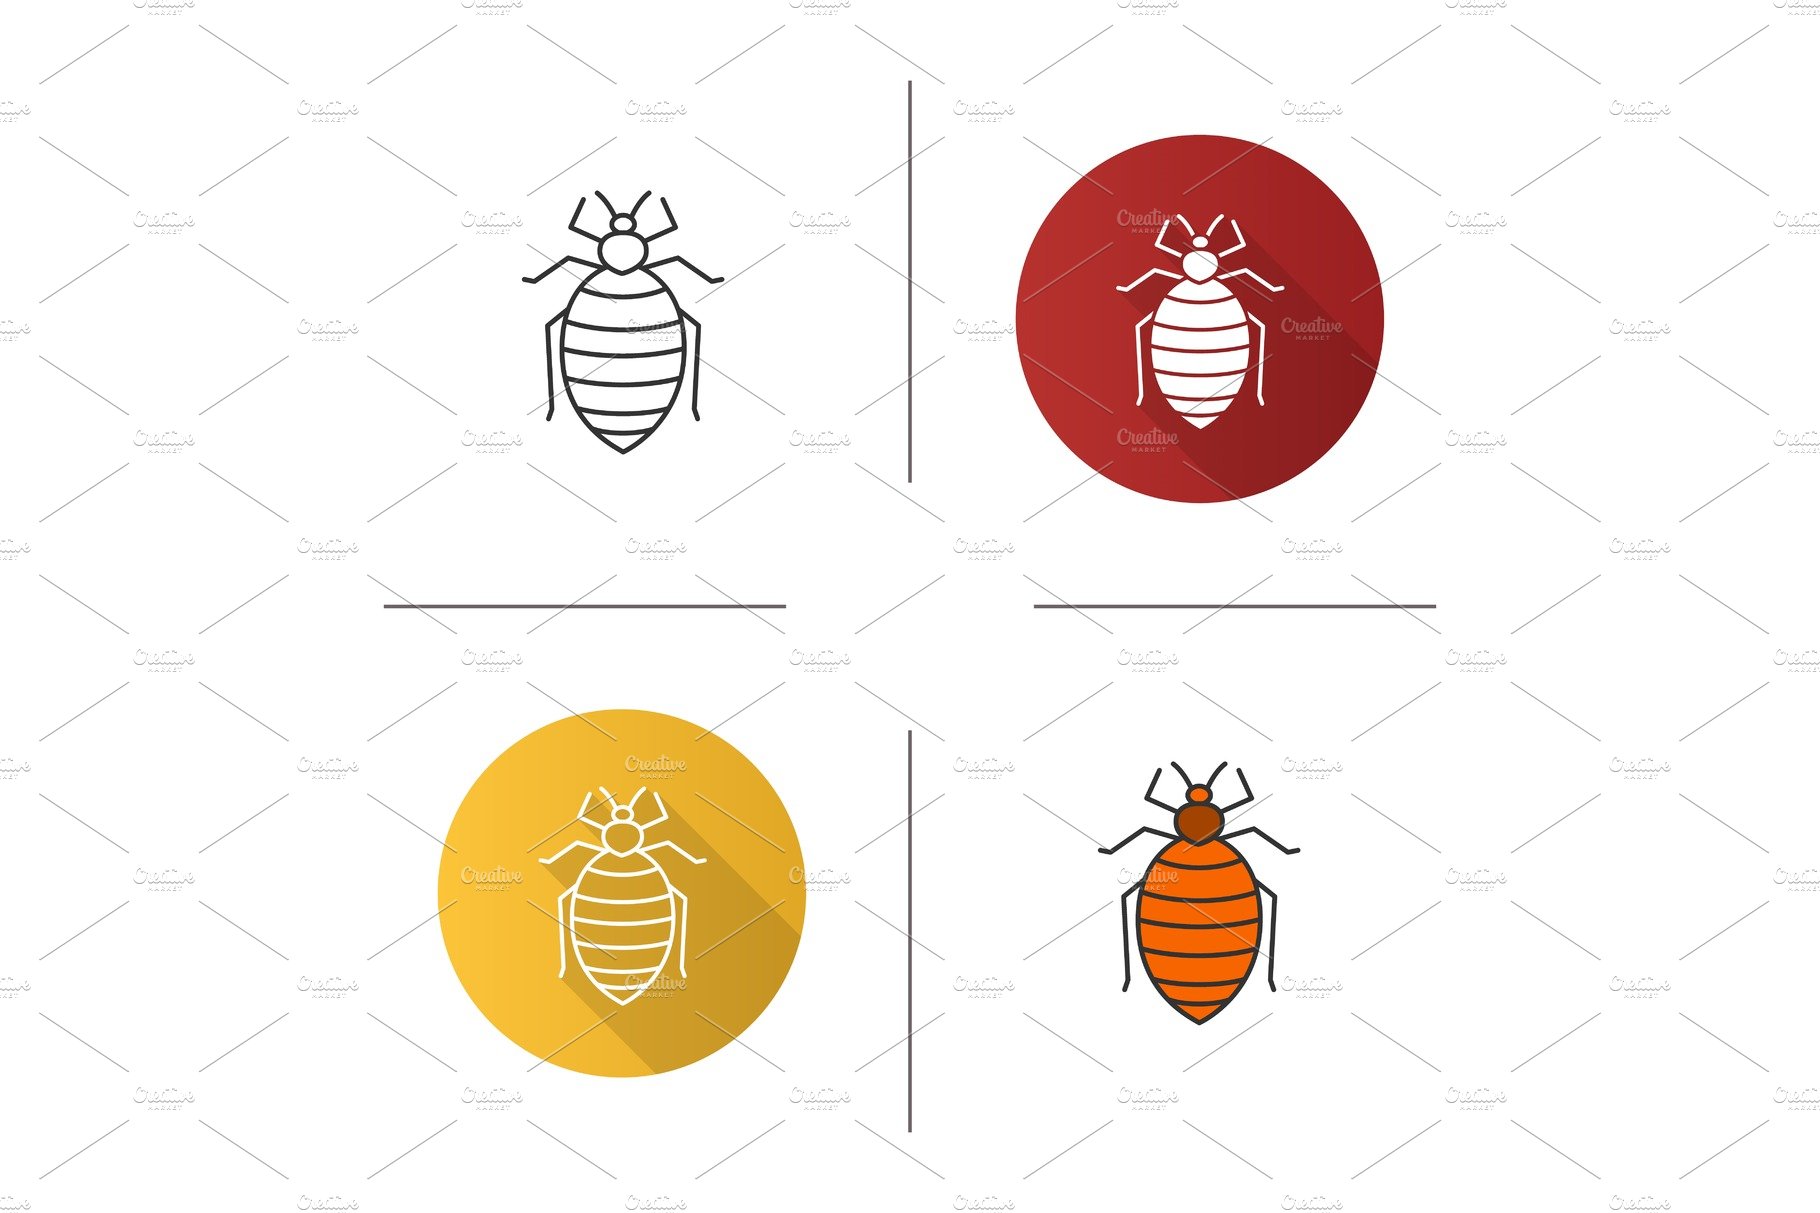 Bed bug icon cover image.